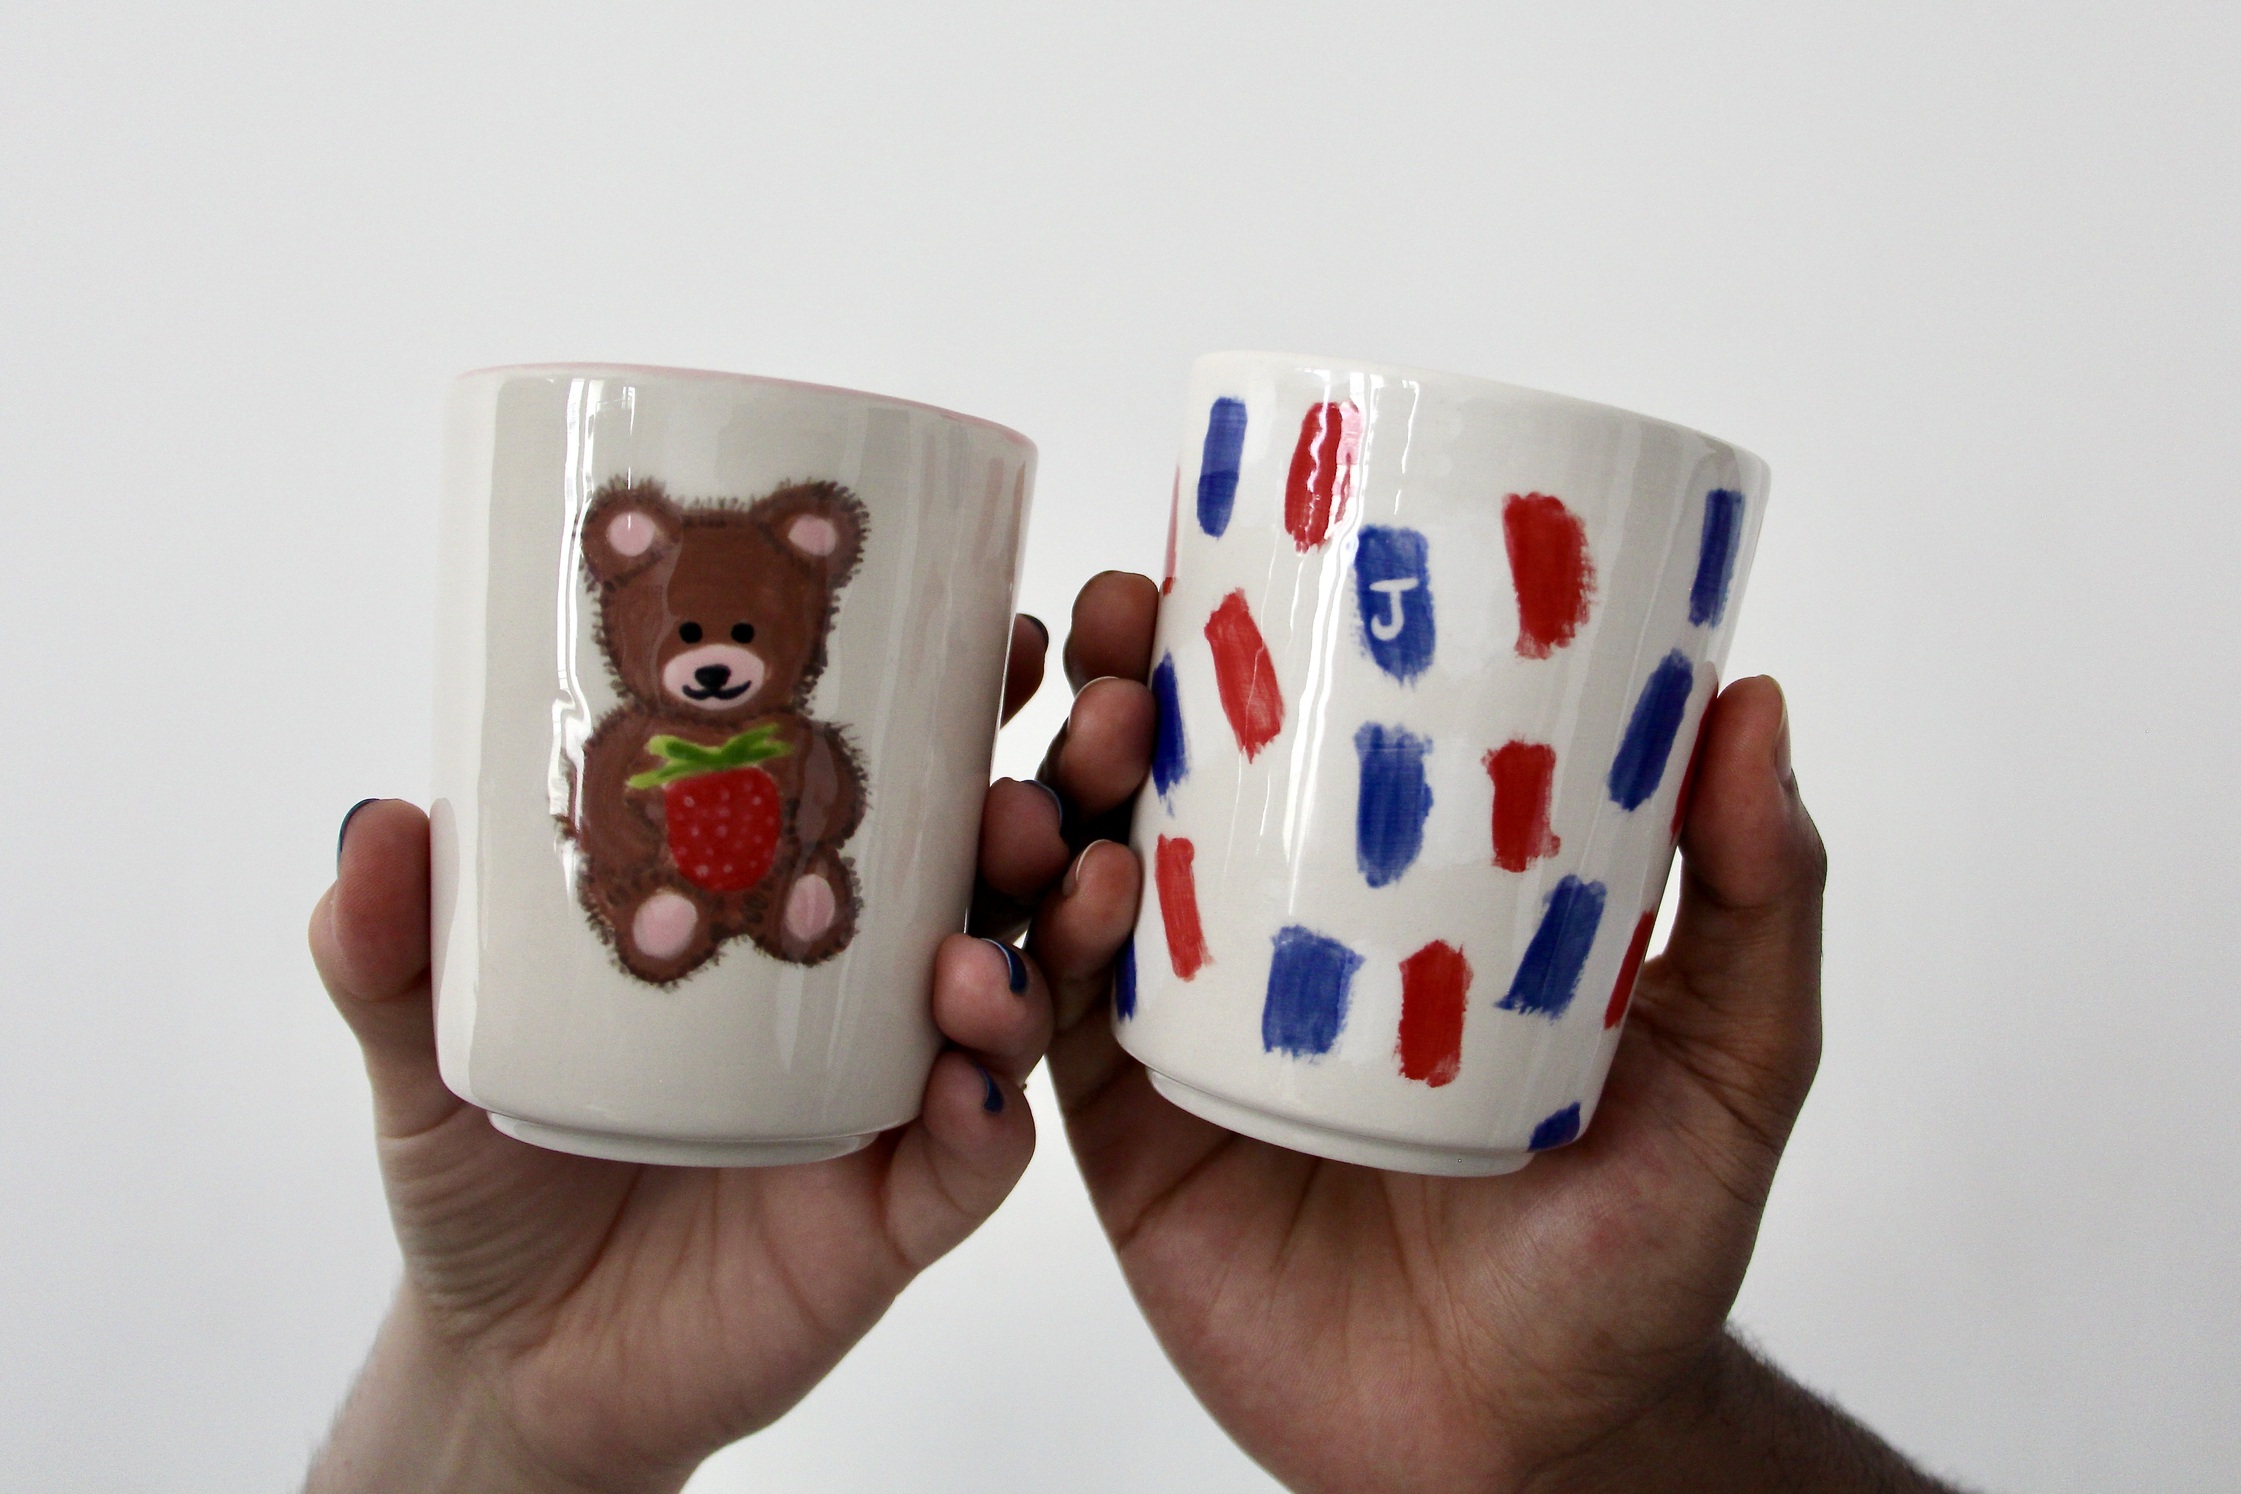 Holding our finished pottery pieces, one with a brown teddy bear holding a strawberry and one covered with French flags.